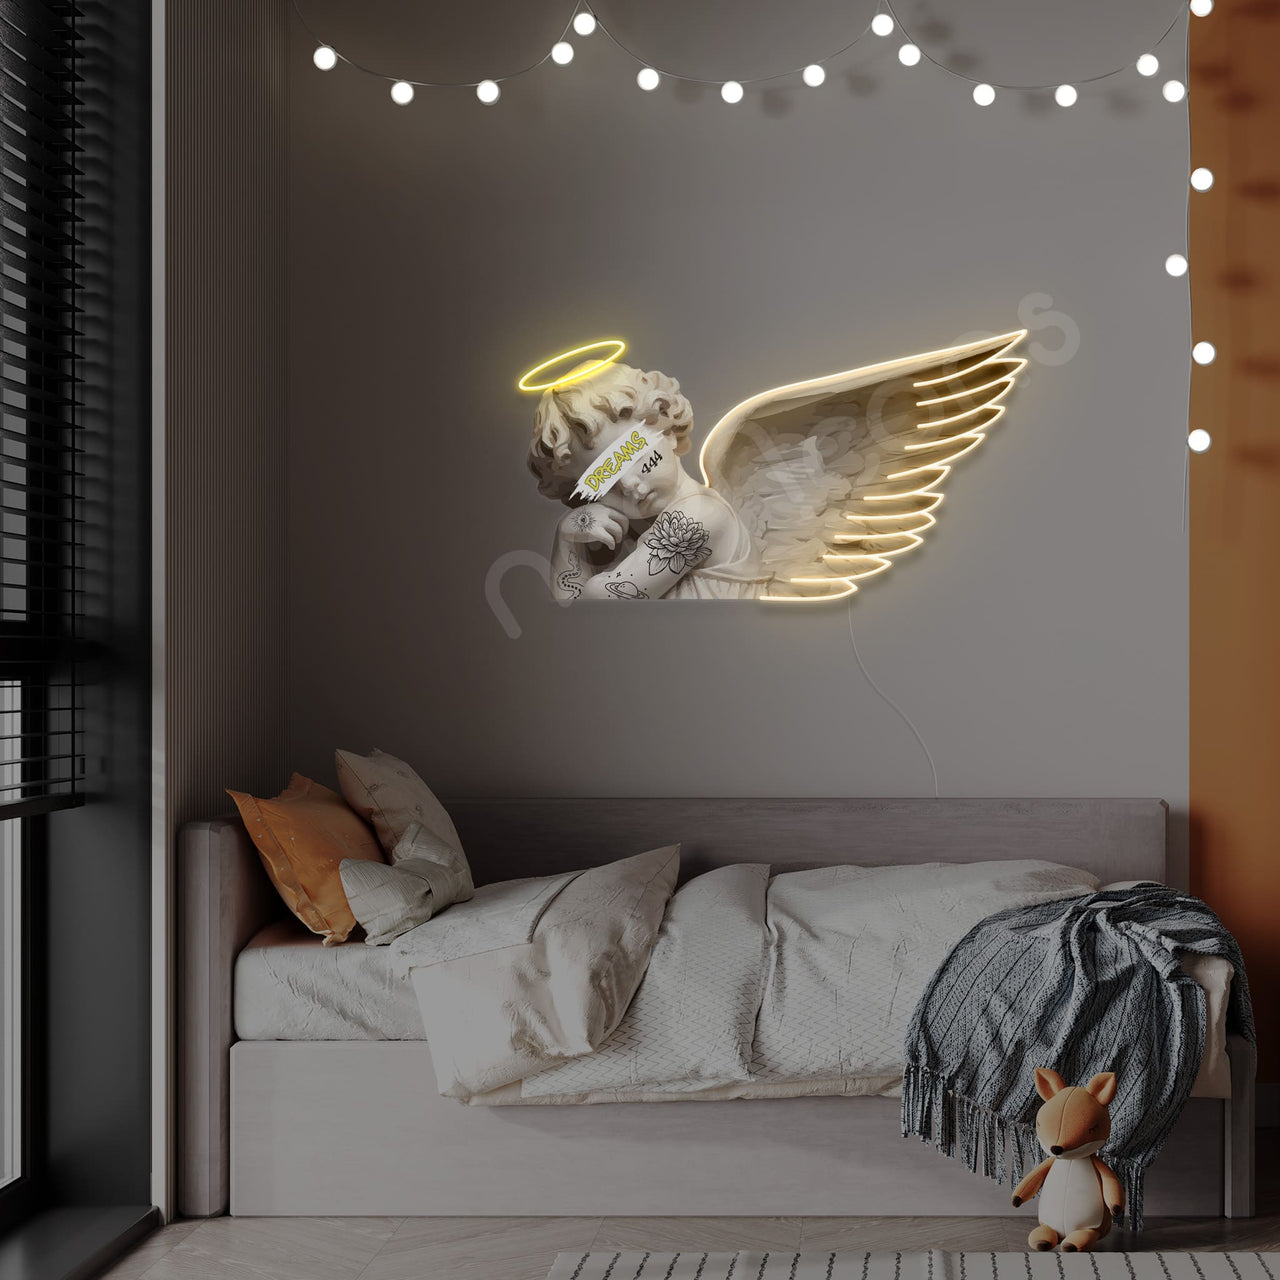 "Winging it" LED Neon x Acrylic Artwork by Neon Icons